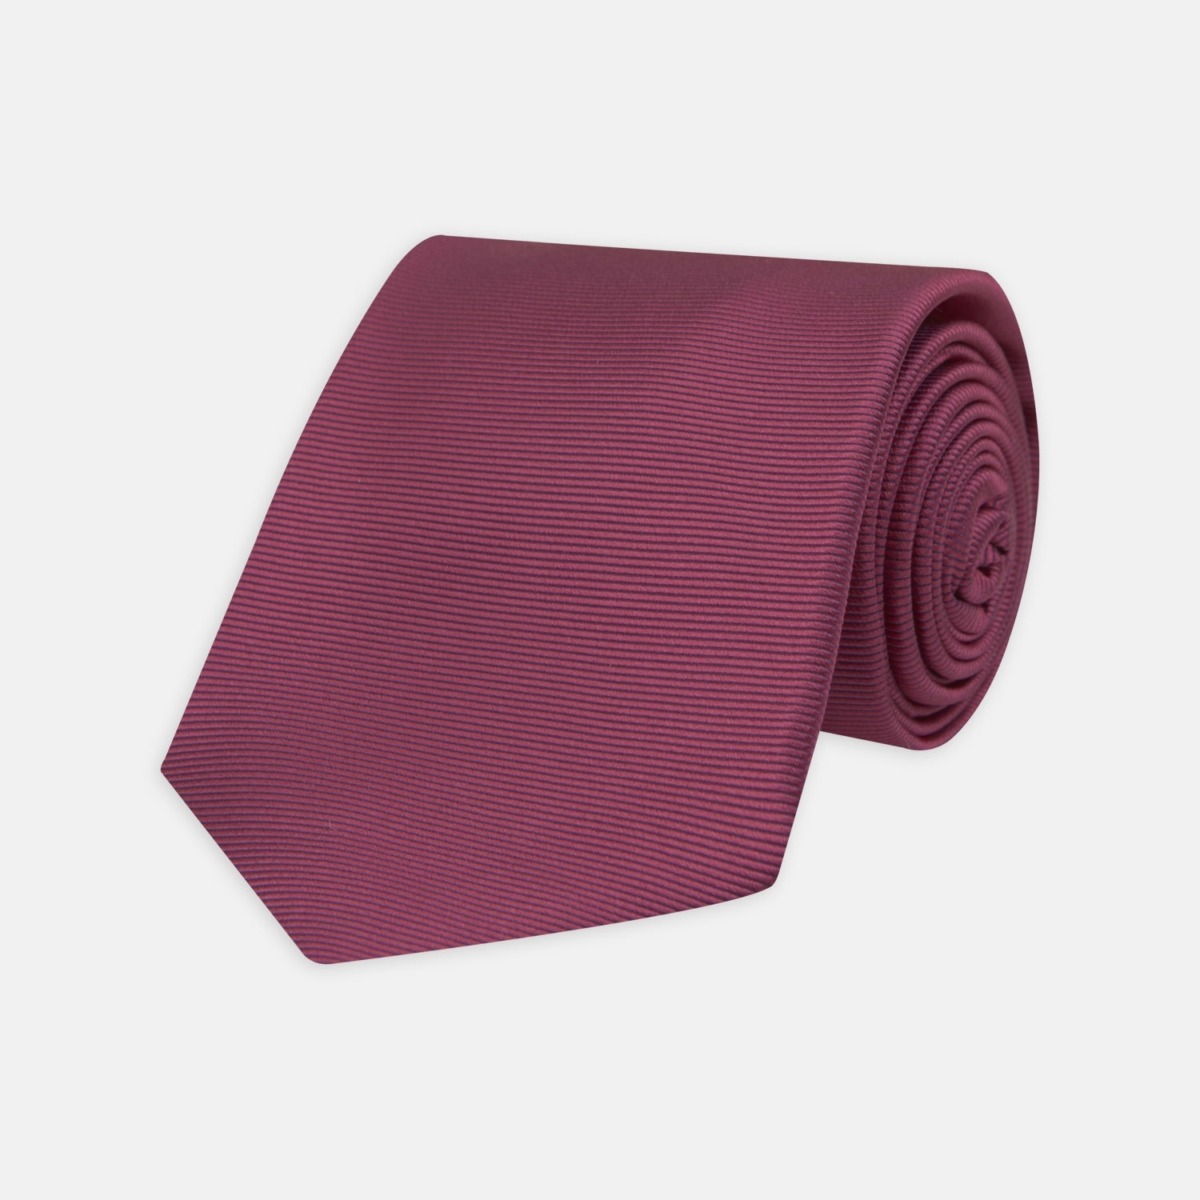 Turnbull & Asser Gents Tie Pink - Turnbull And Asser GOOFASH